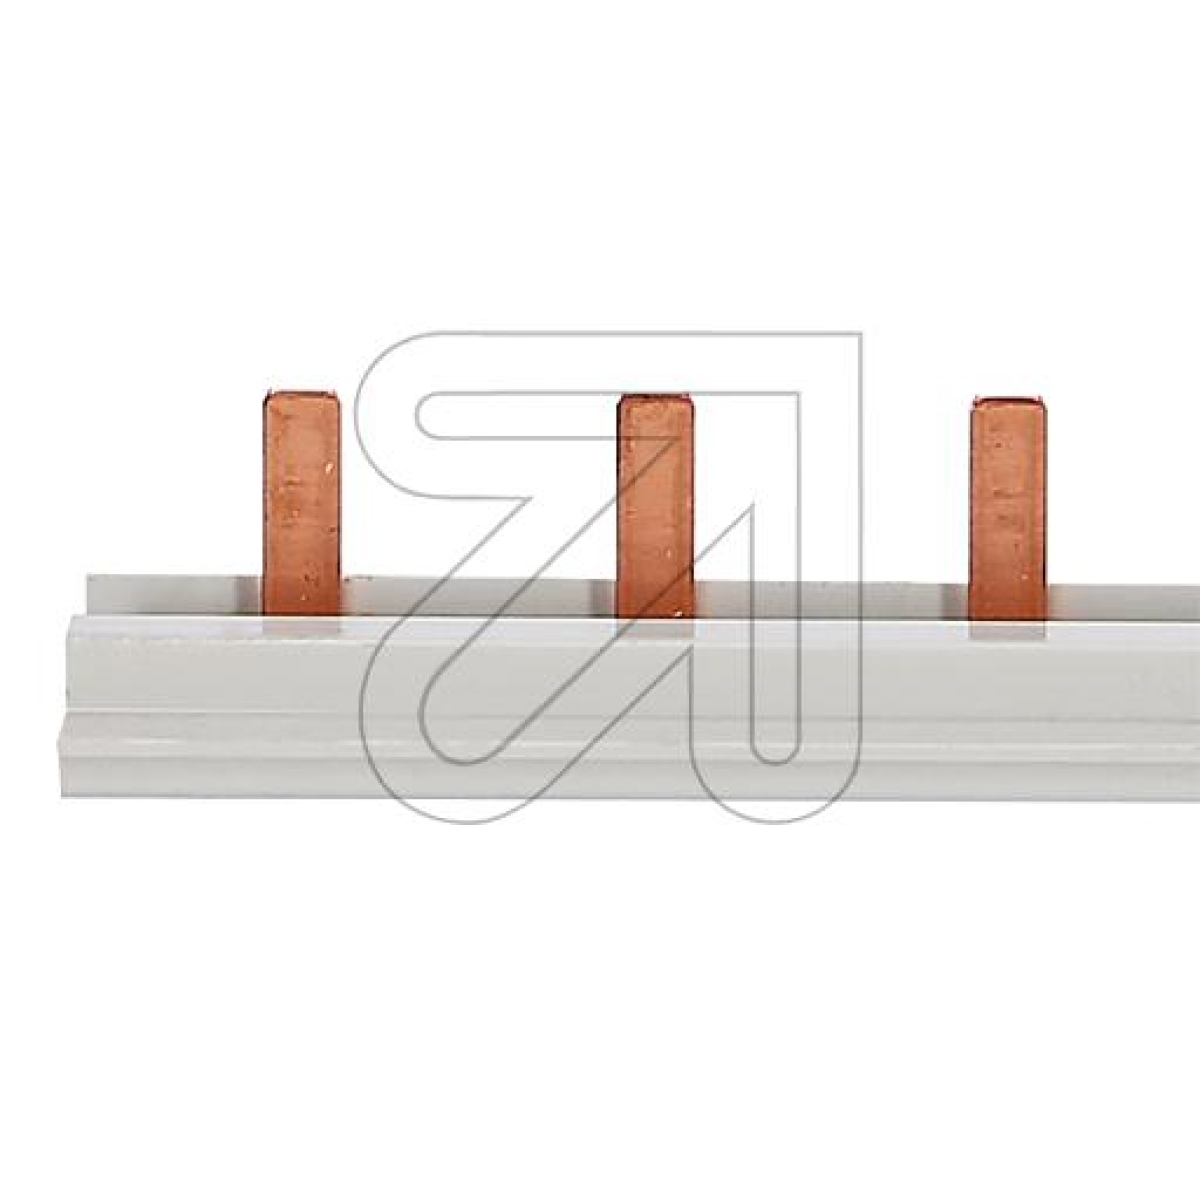 ABBBusbars PS 1/9 158mm 9 1-pole 2CDL210001R1009Article-No: 180760